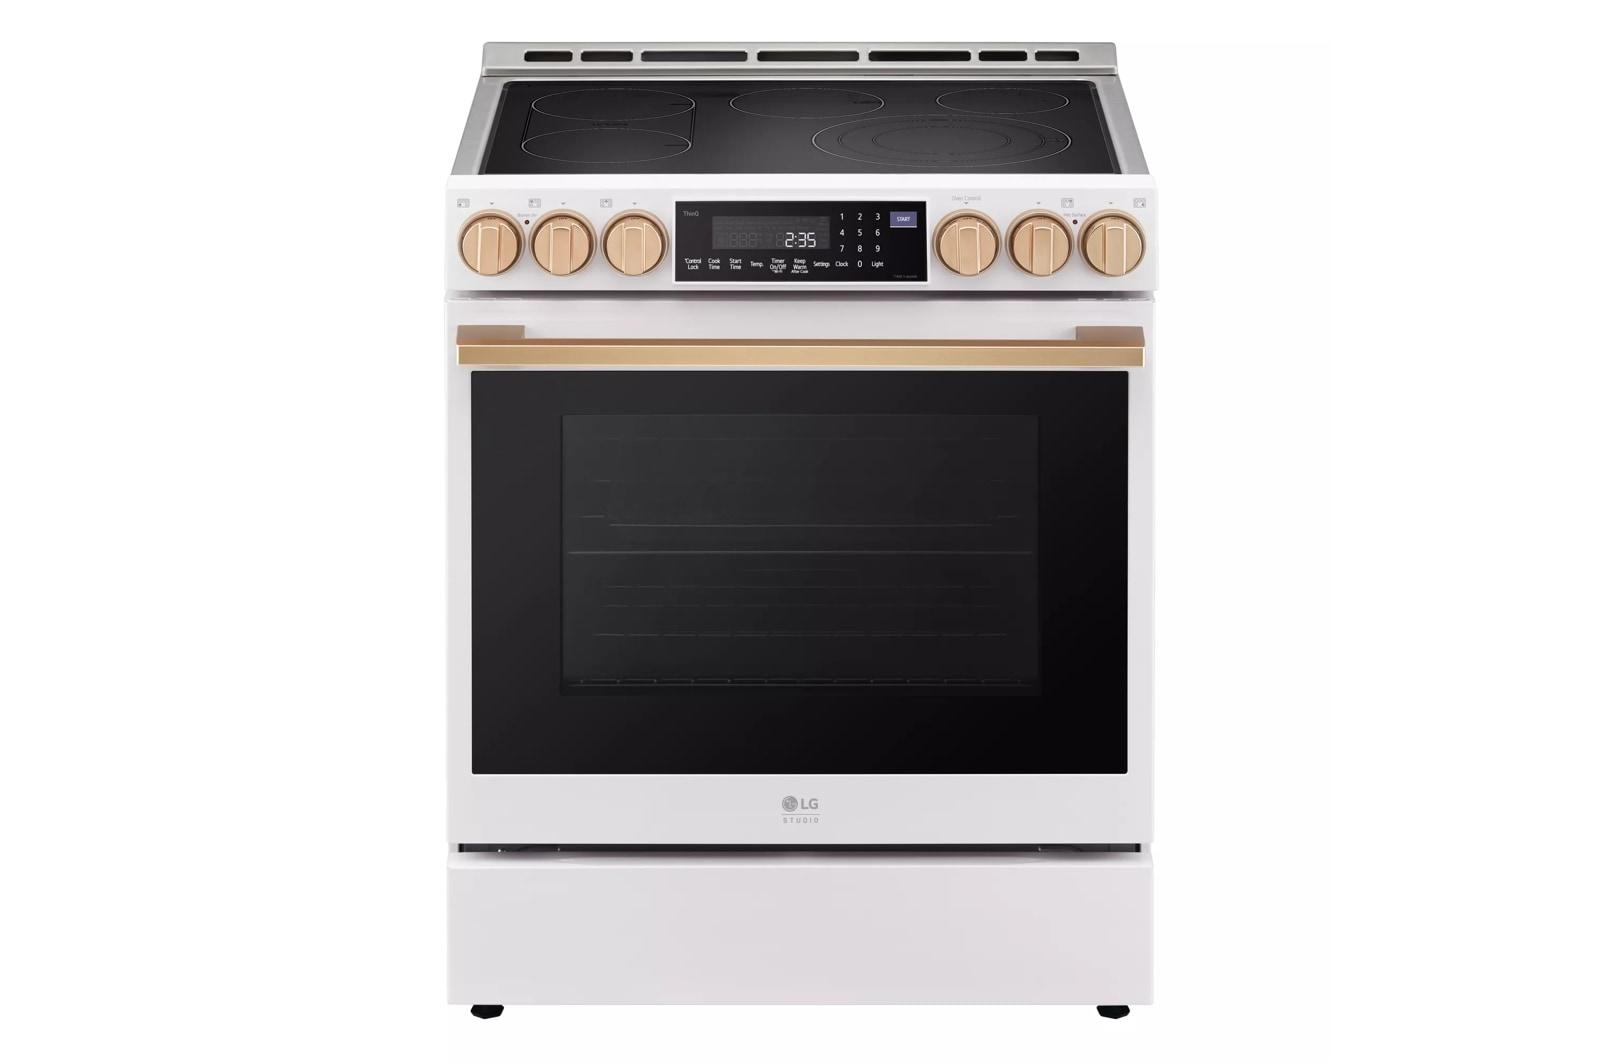 LG STUDIO 6.3 cu. ft. InstaView® Electric Slide-in Range with ProBake Convection® and Air Fry